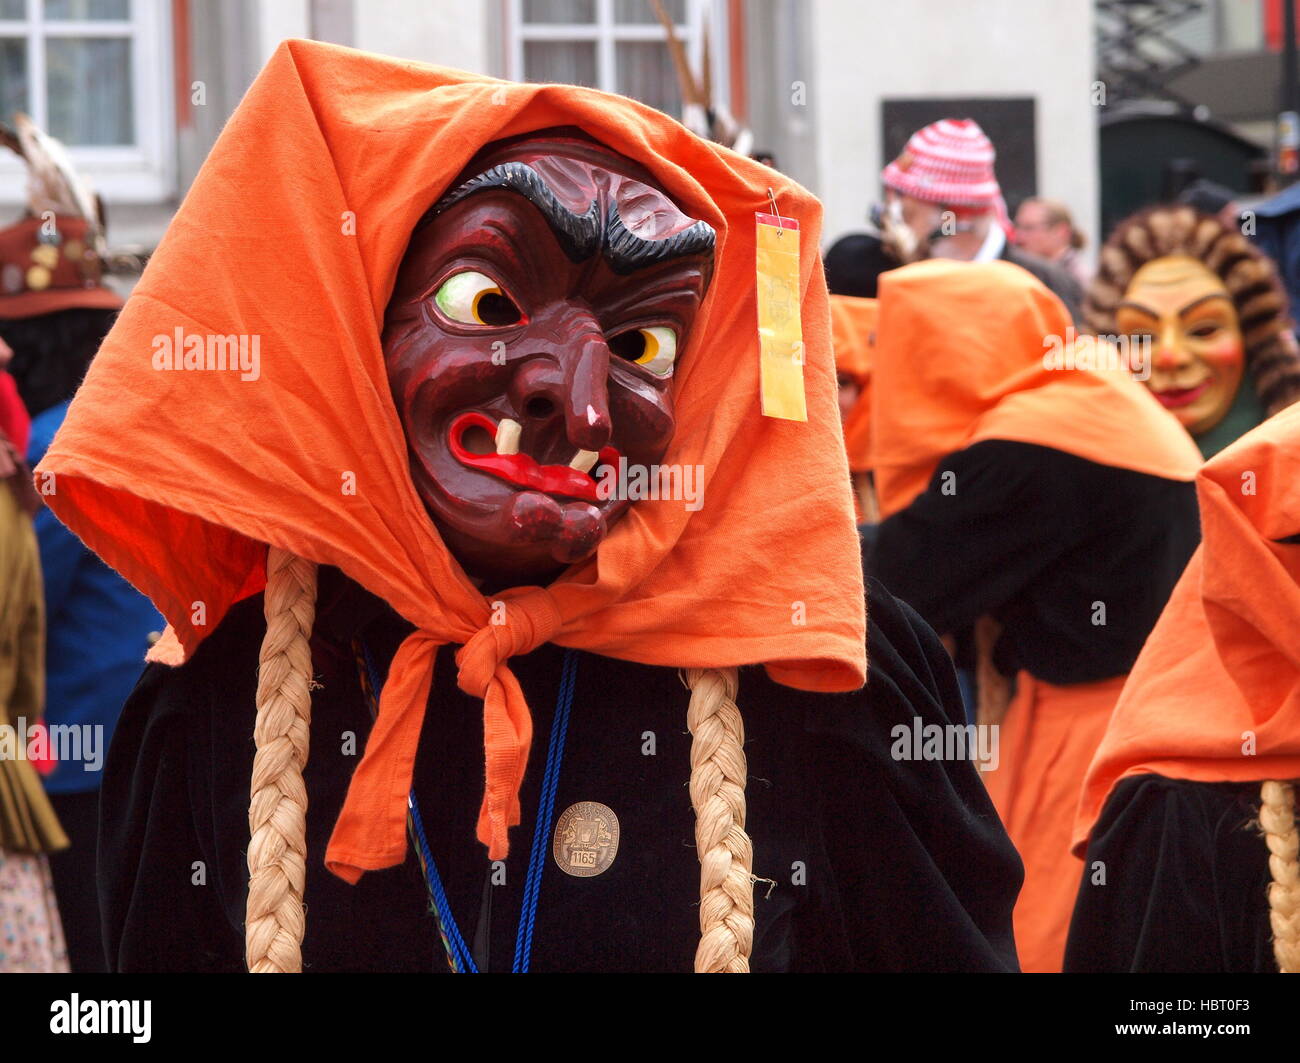 Fasnet - Witch fool figure from Ravensburg Stock Photo